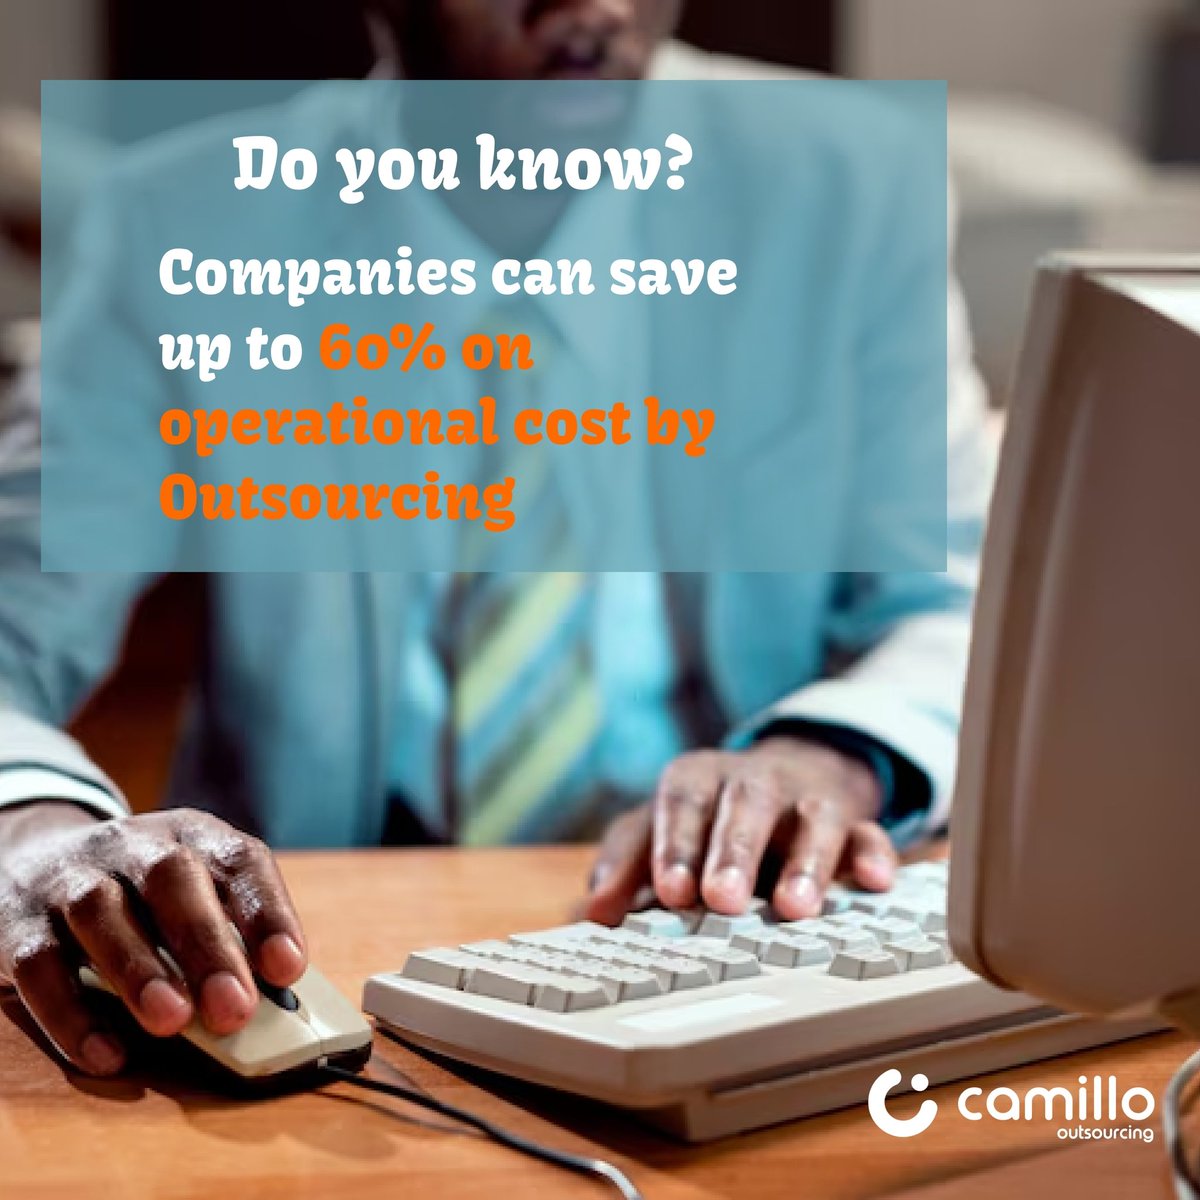 Outsourcing saves cost.

Outsource your business process today.

info@camillo.ng
0201-343-8060
0201-343-8061

#camillo #outsource #businessprocess #operationalcost #businessowner
#outsourcingpartner